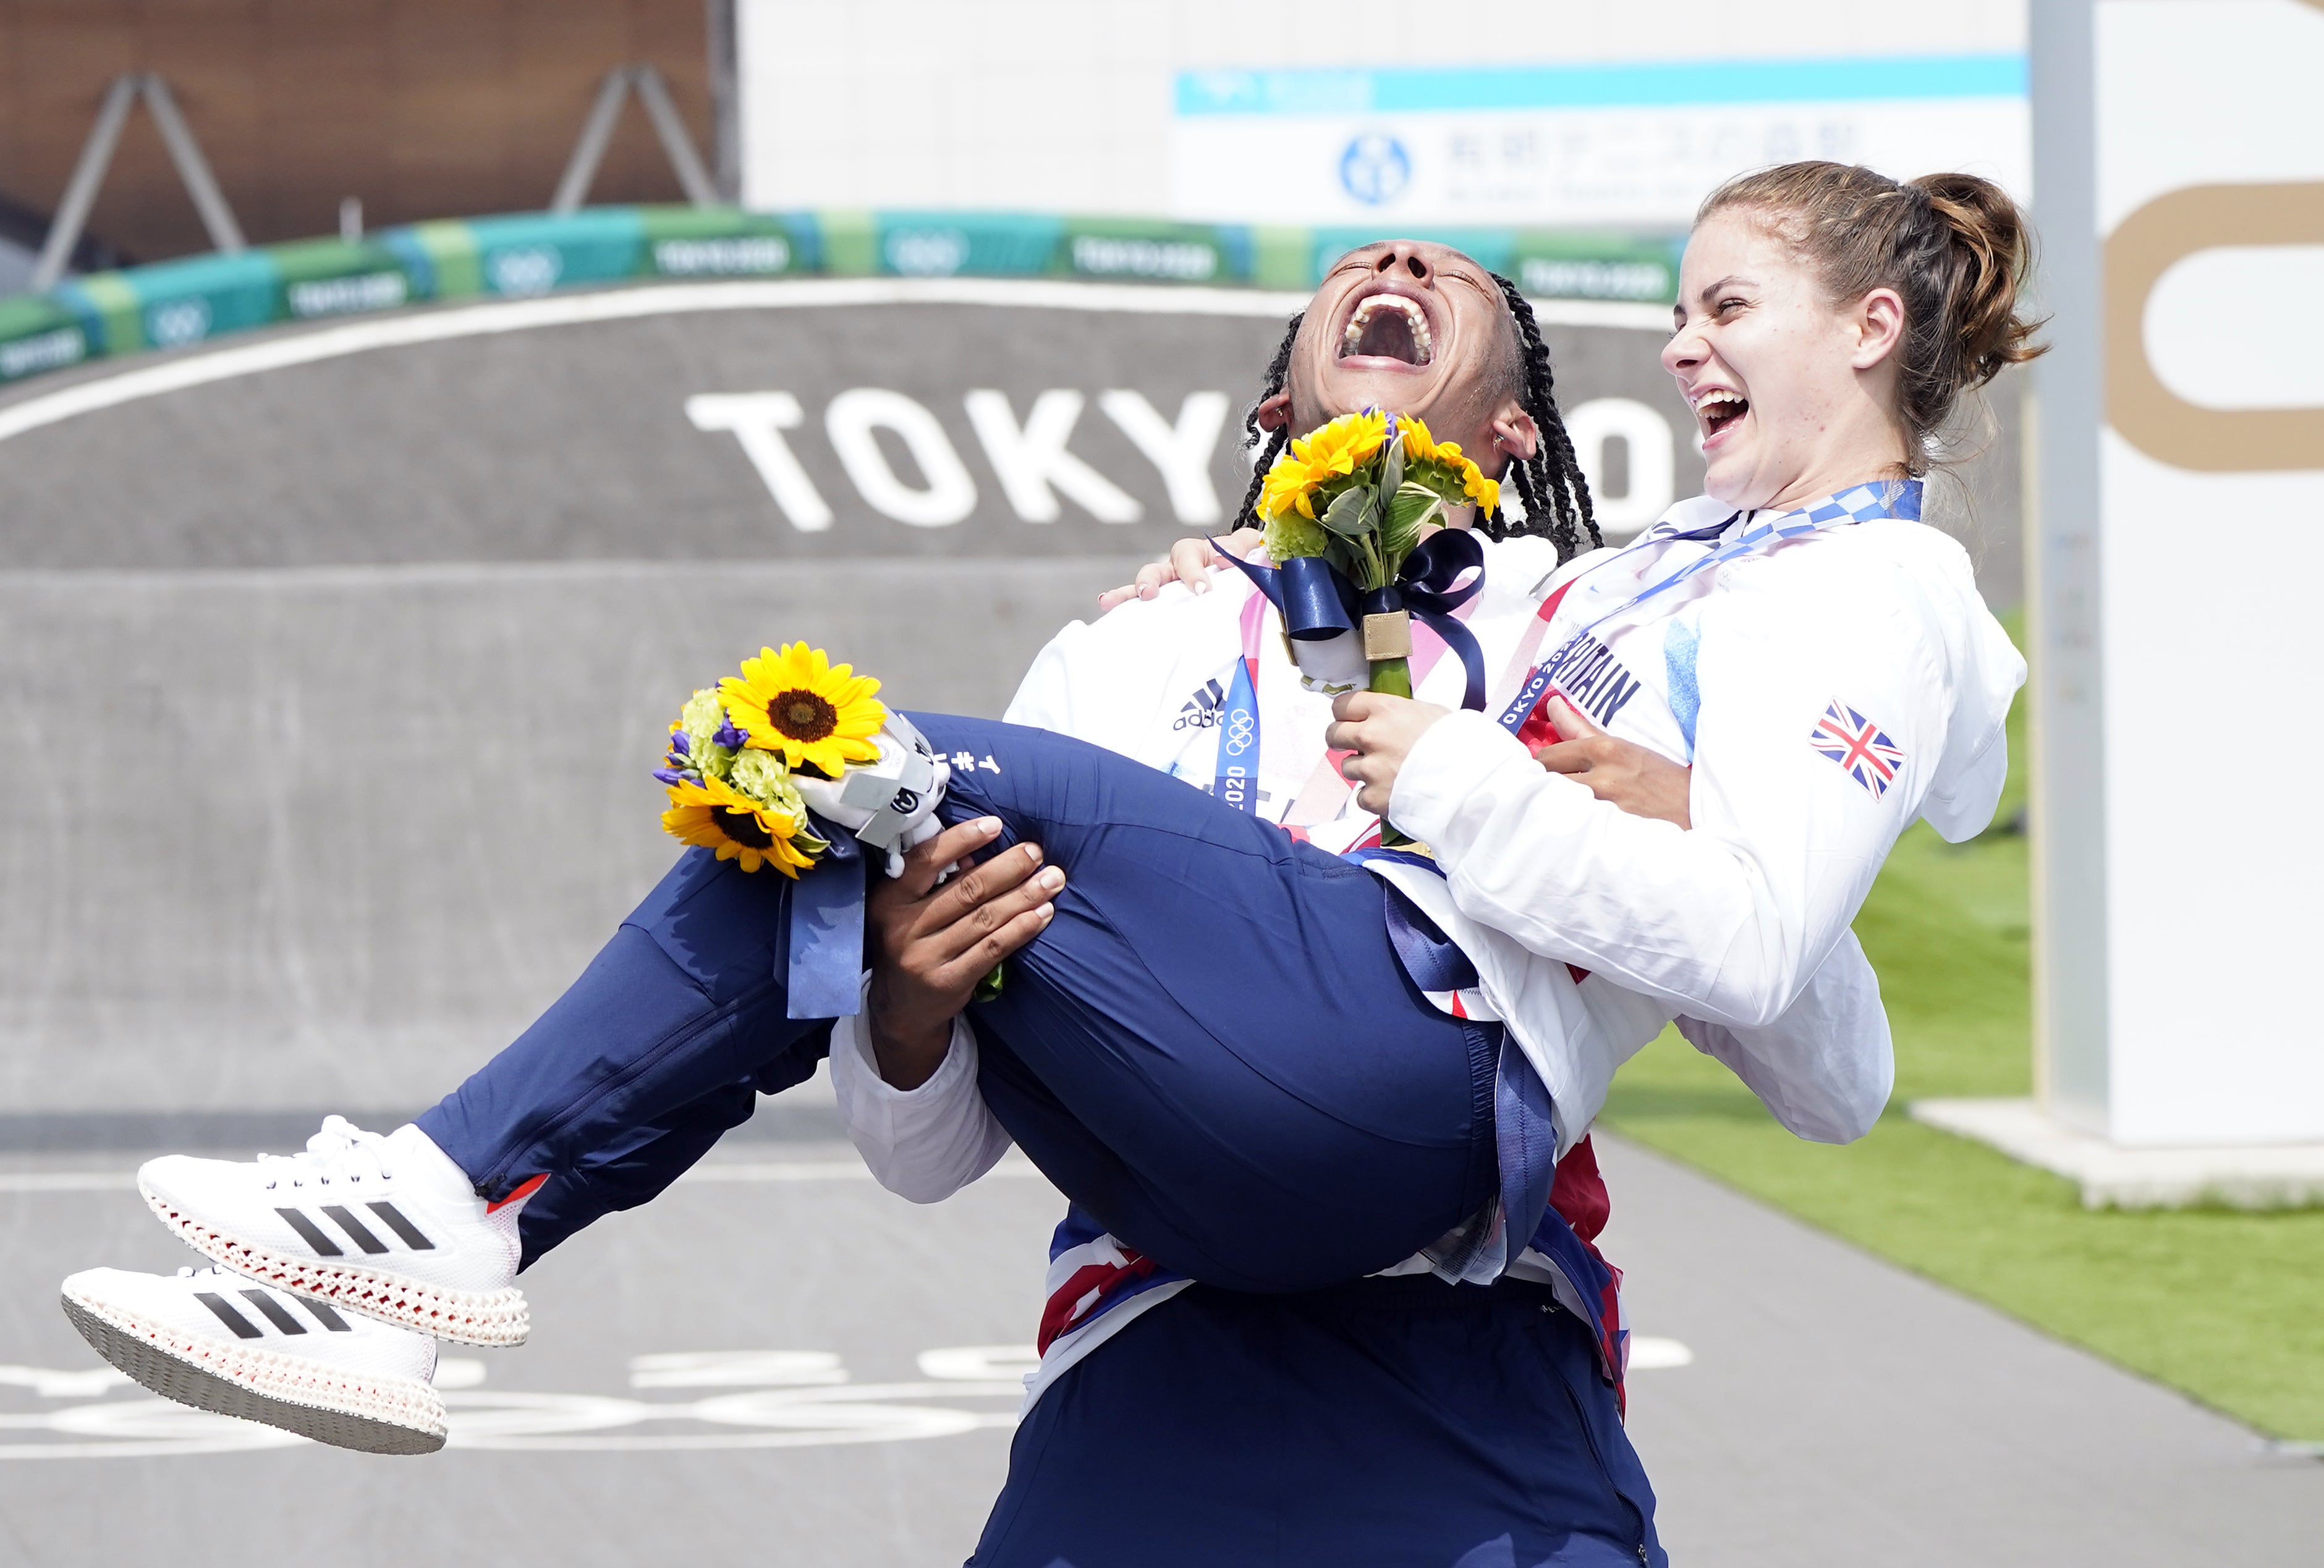 Beth Shriever and Kye Whyte won their medals within minutes of each other in Tokyo last summer (Danny Lawson/PA)